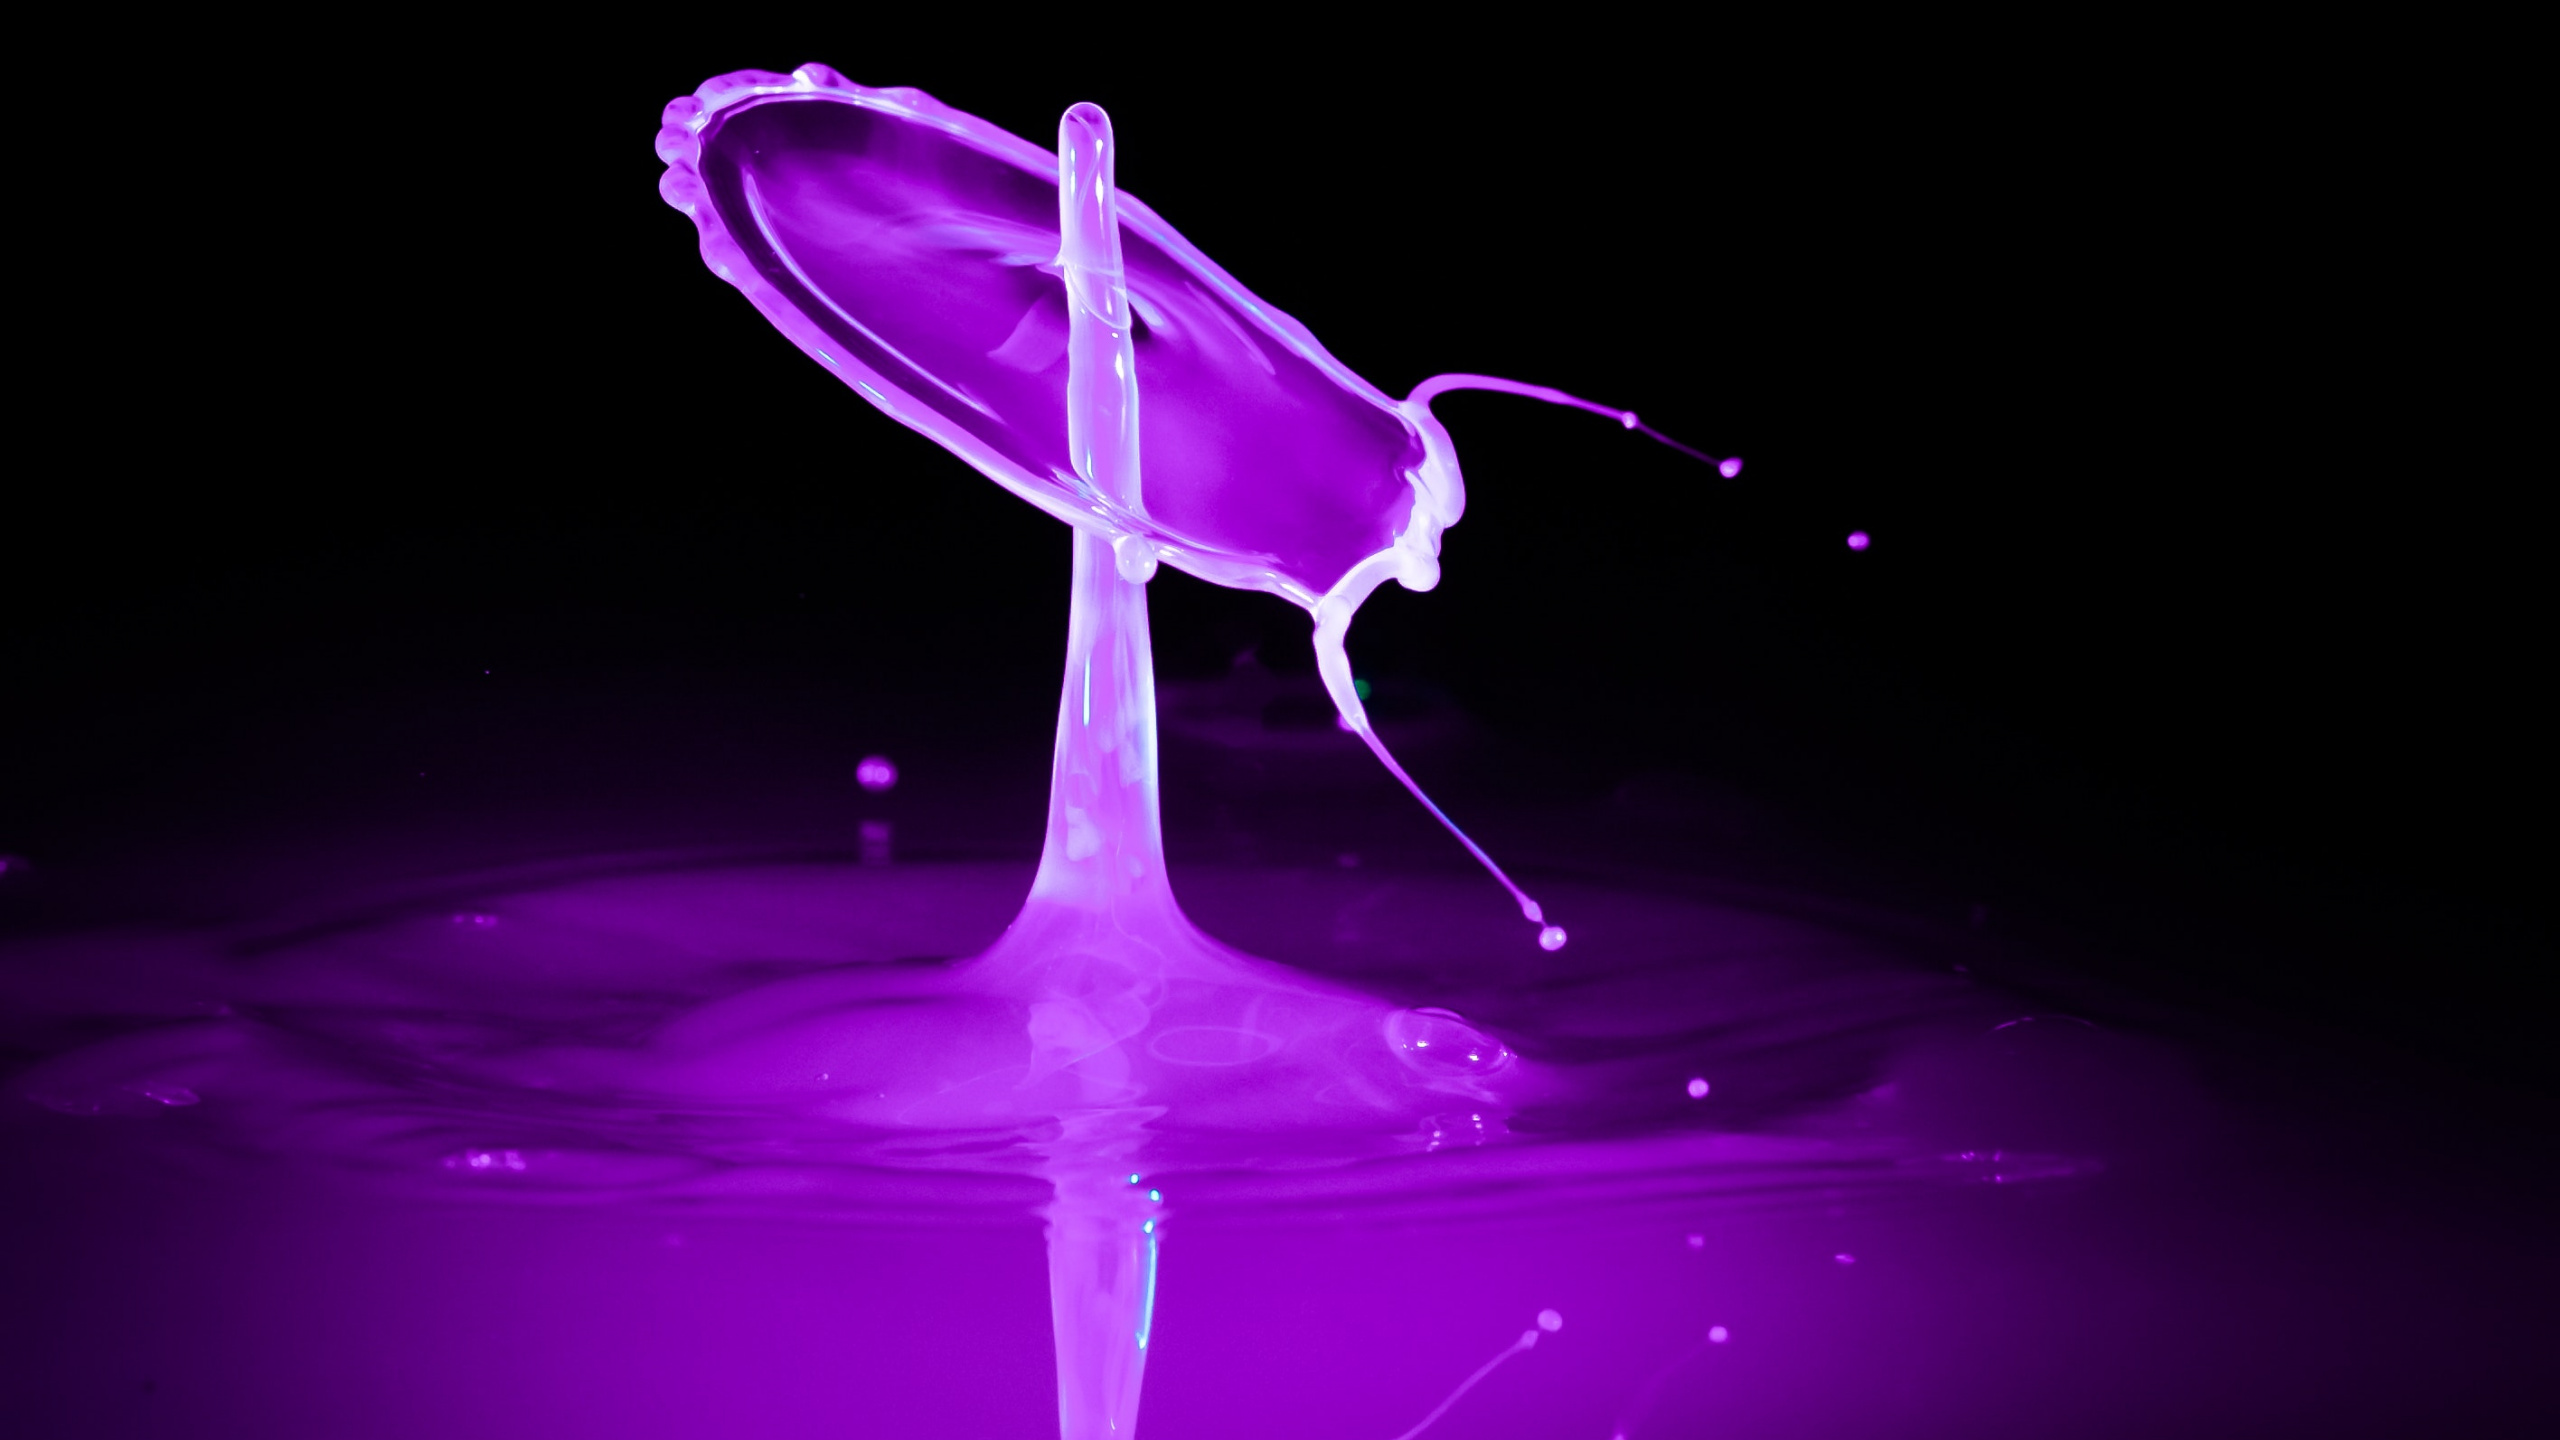 Purple and White Light Illustration. Wallpaper in 2560x1440 Resolution